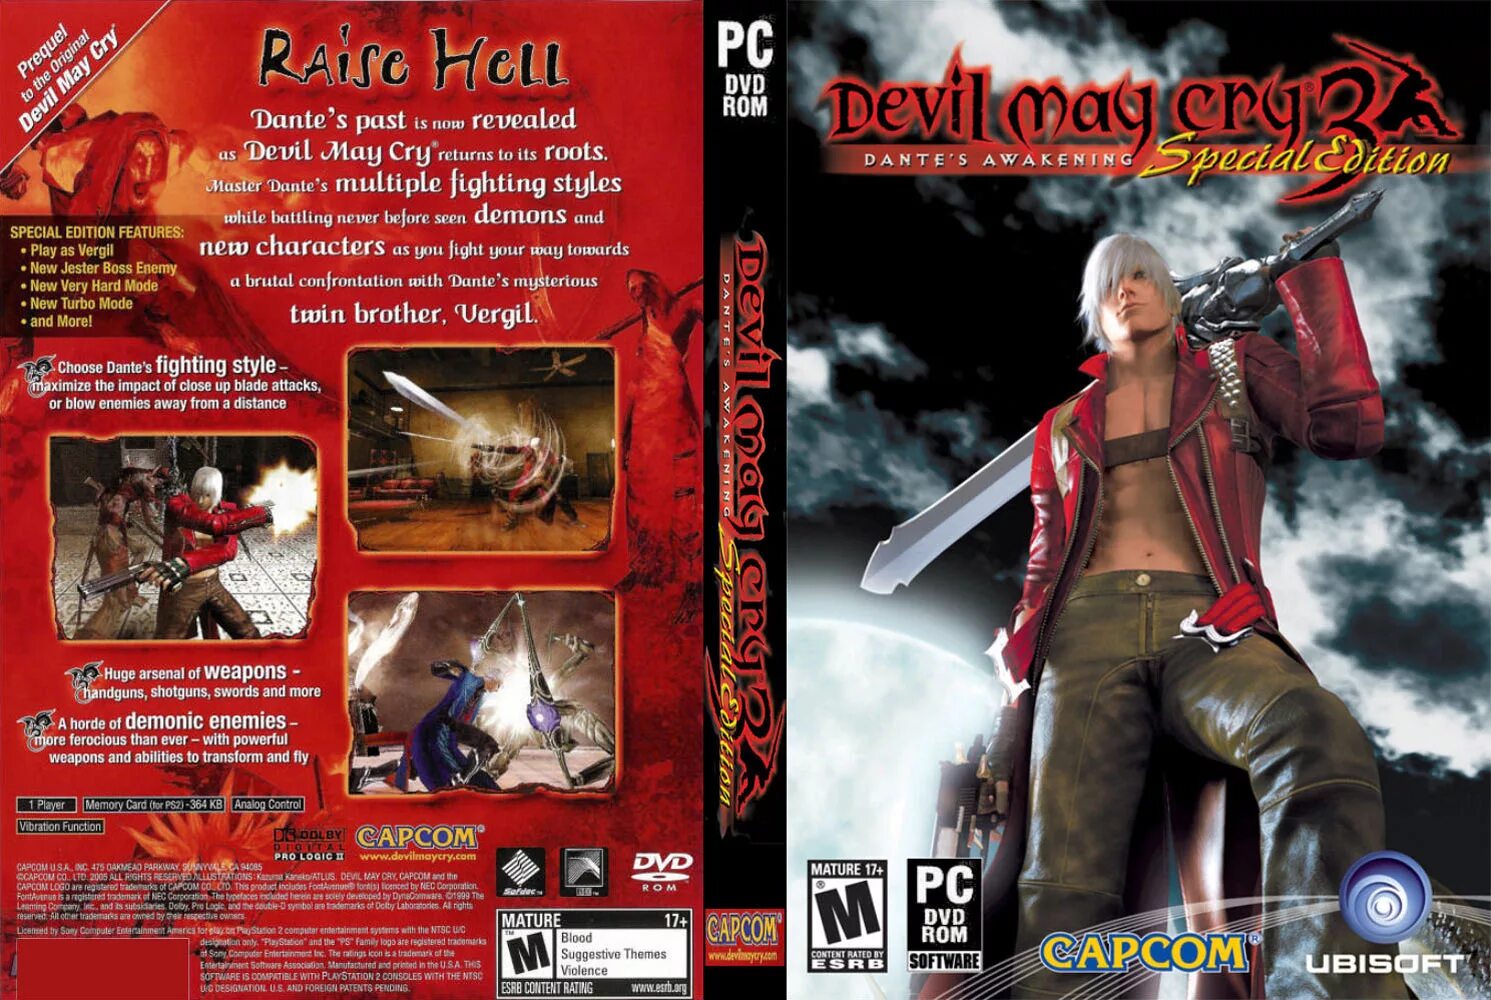 Devil May Cry 3 диск. Диск Devil May Cry 3 PC. Devil May Cry 3: Dante’s Awakening. DMC 3 Special Edition. Dmc 3 special